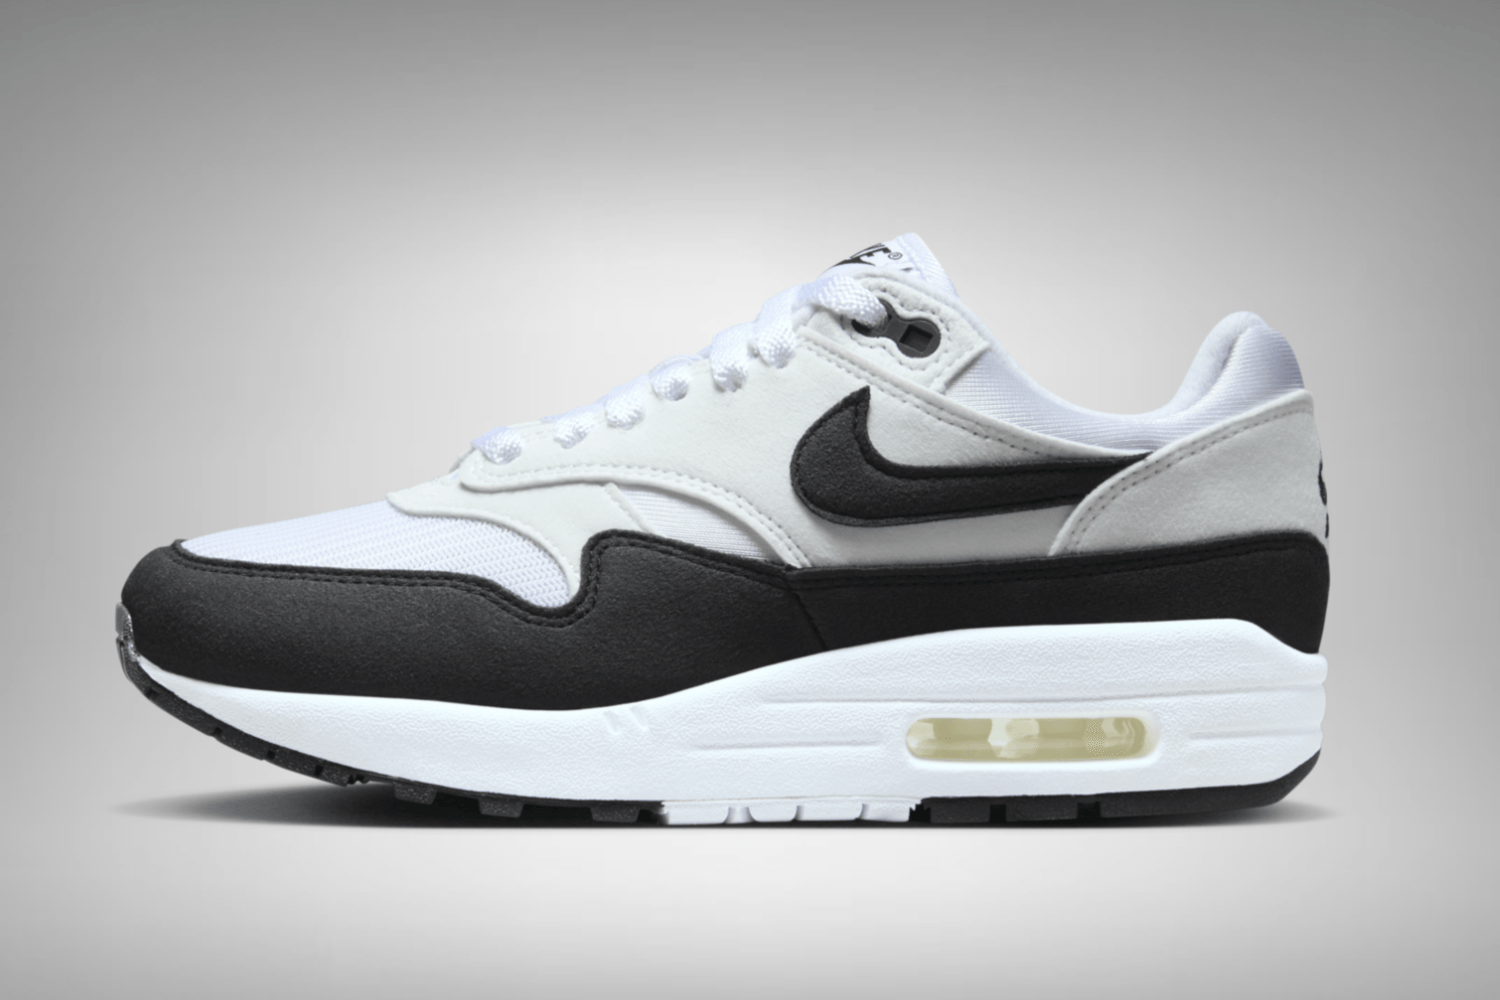 Release reminder: Nike Air Max 1 WMNS 'Black & White'